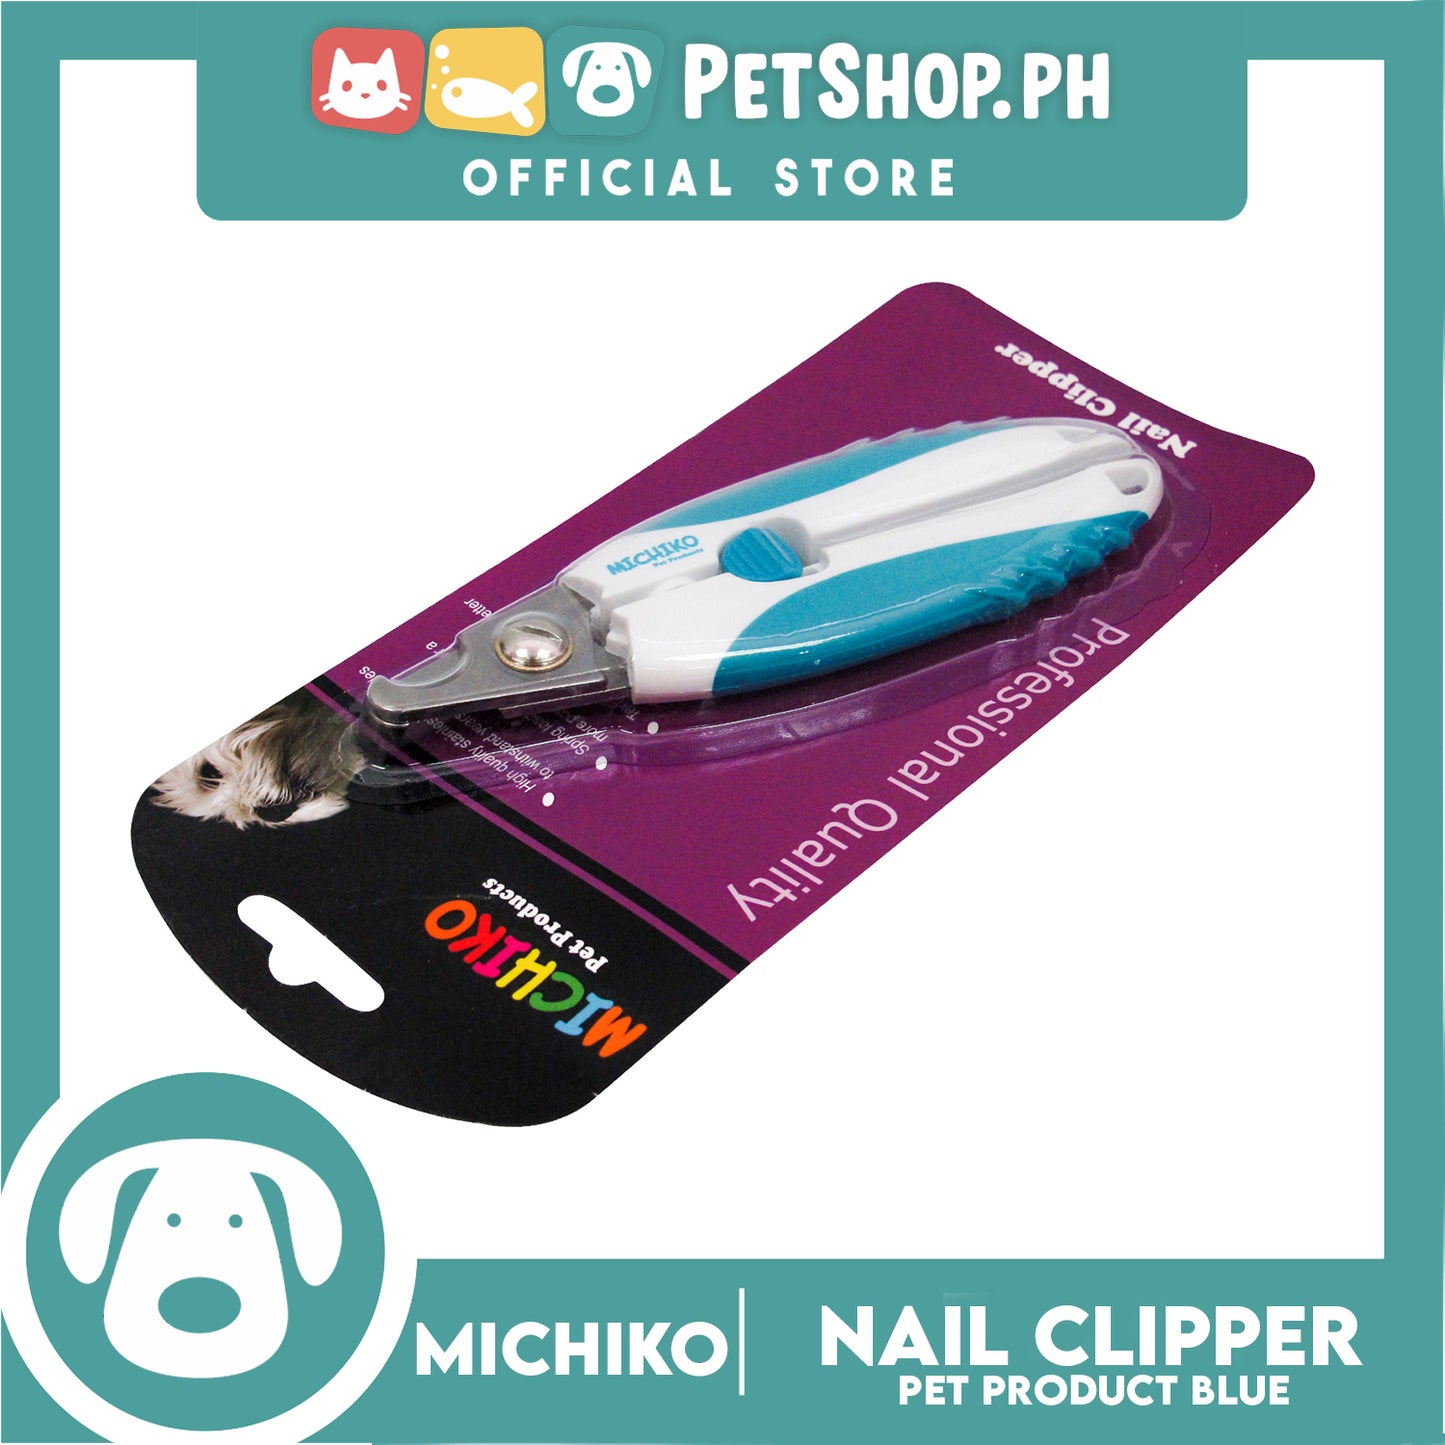 Michiko Premium Pet Nail Clipper Large (Blue) Trimming Nails Grooming For Small Breed Dogs And Cats